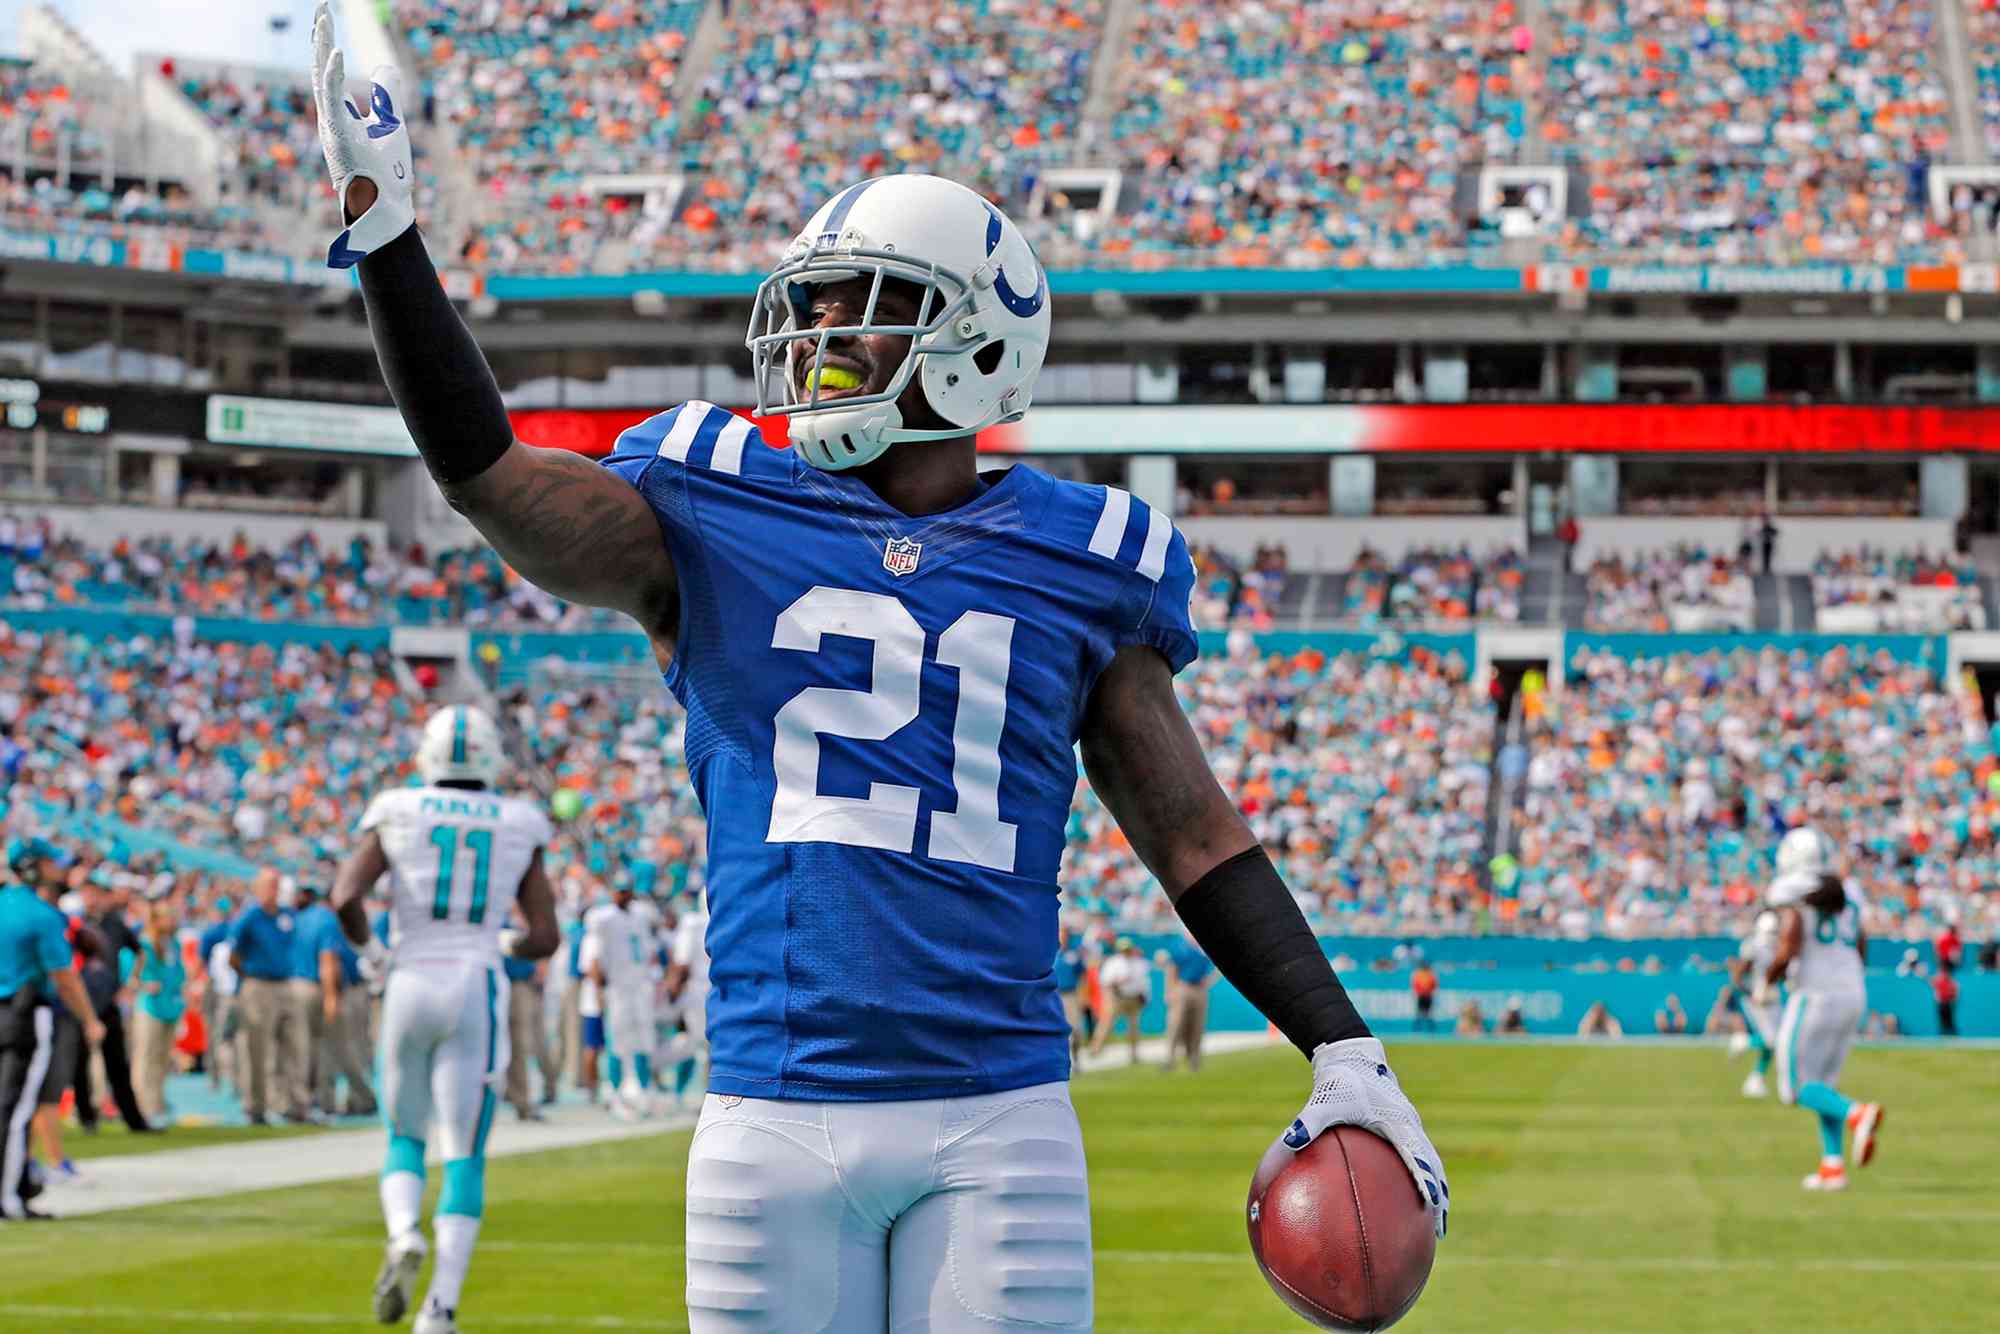 After intecepting Miami Dolphins quarterback Ryan Tennehill in the end zone, Indianapolis Colts' Vontae Davis celebrates during the first quarter on Sunday, Dec. 27, 2015, at Sun Life Stadium in Miami Gardens, Fla.